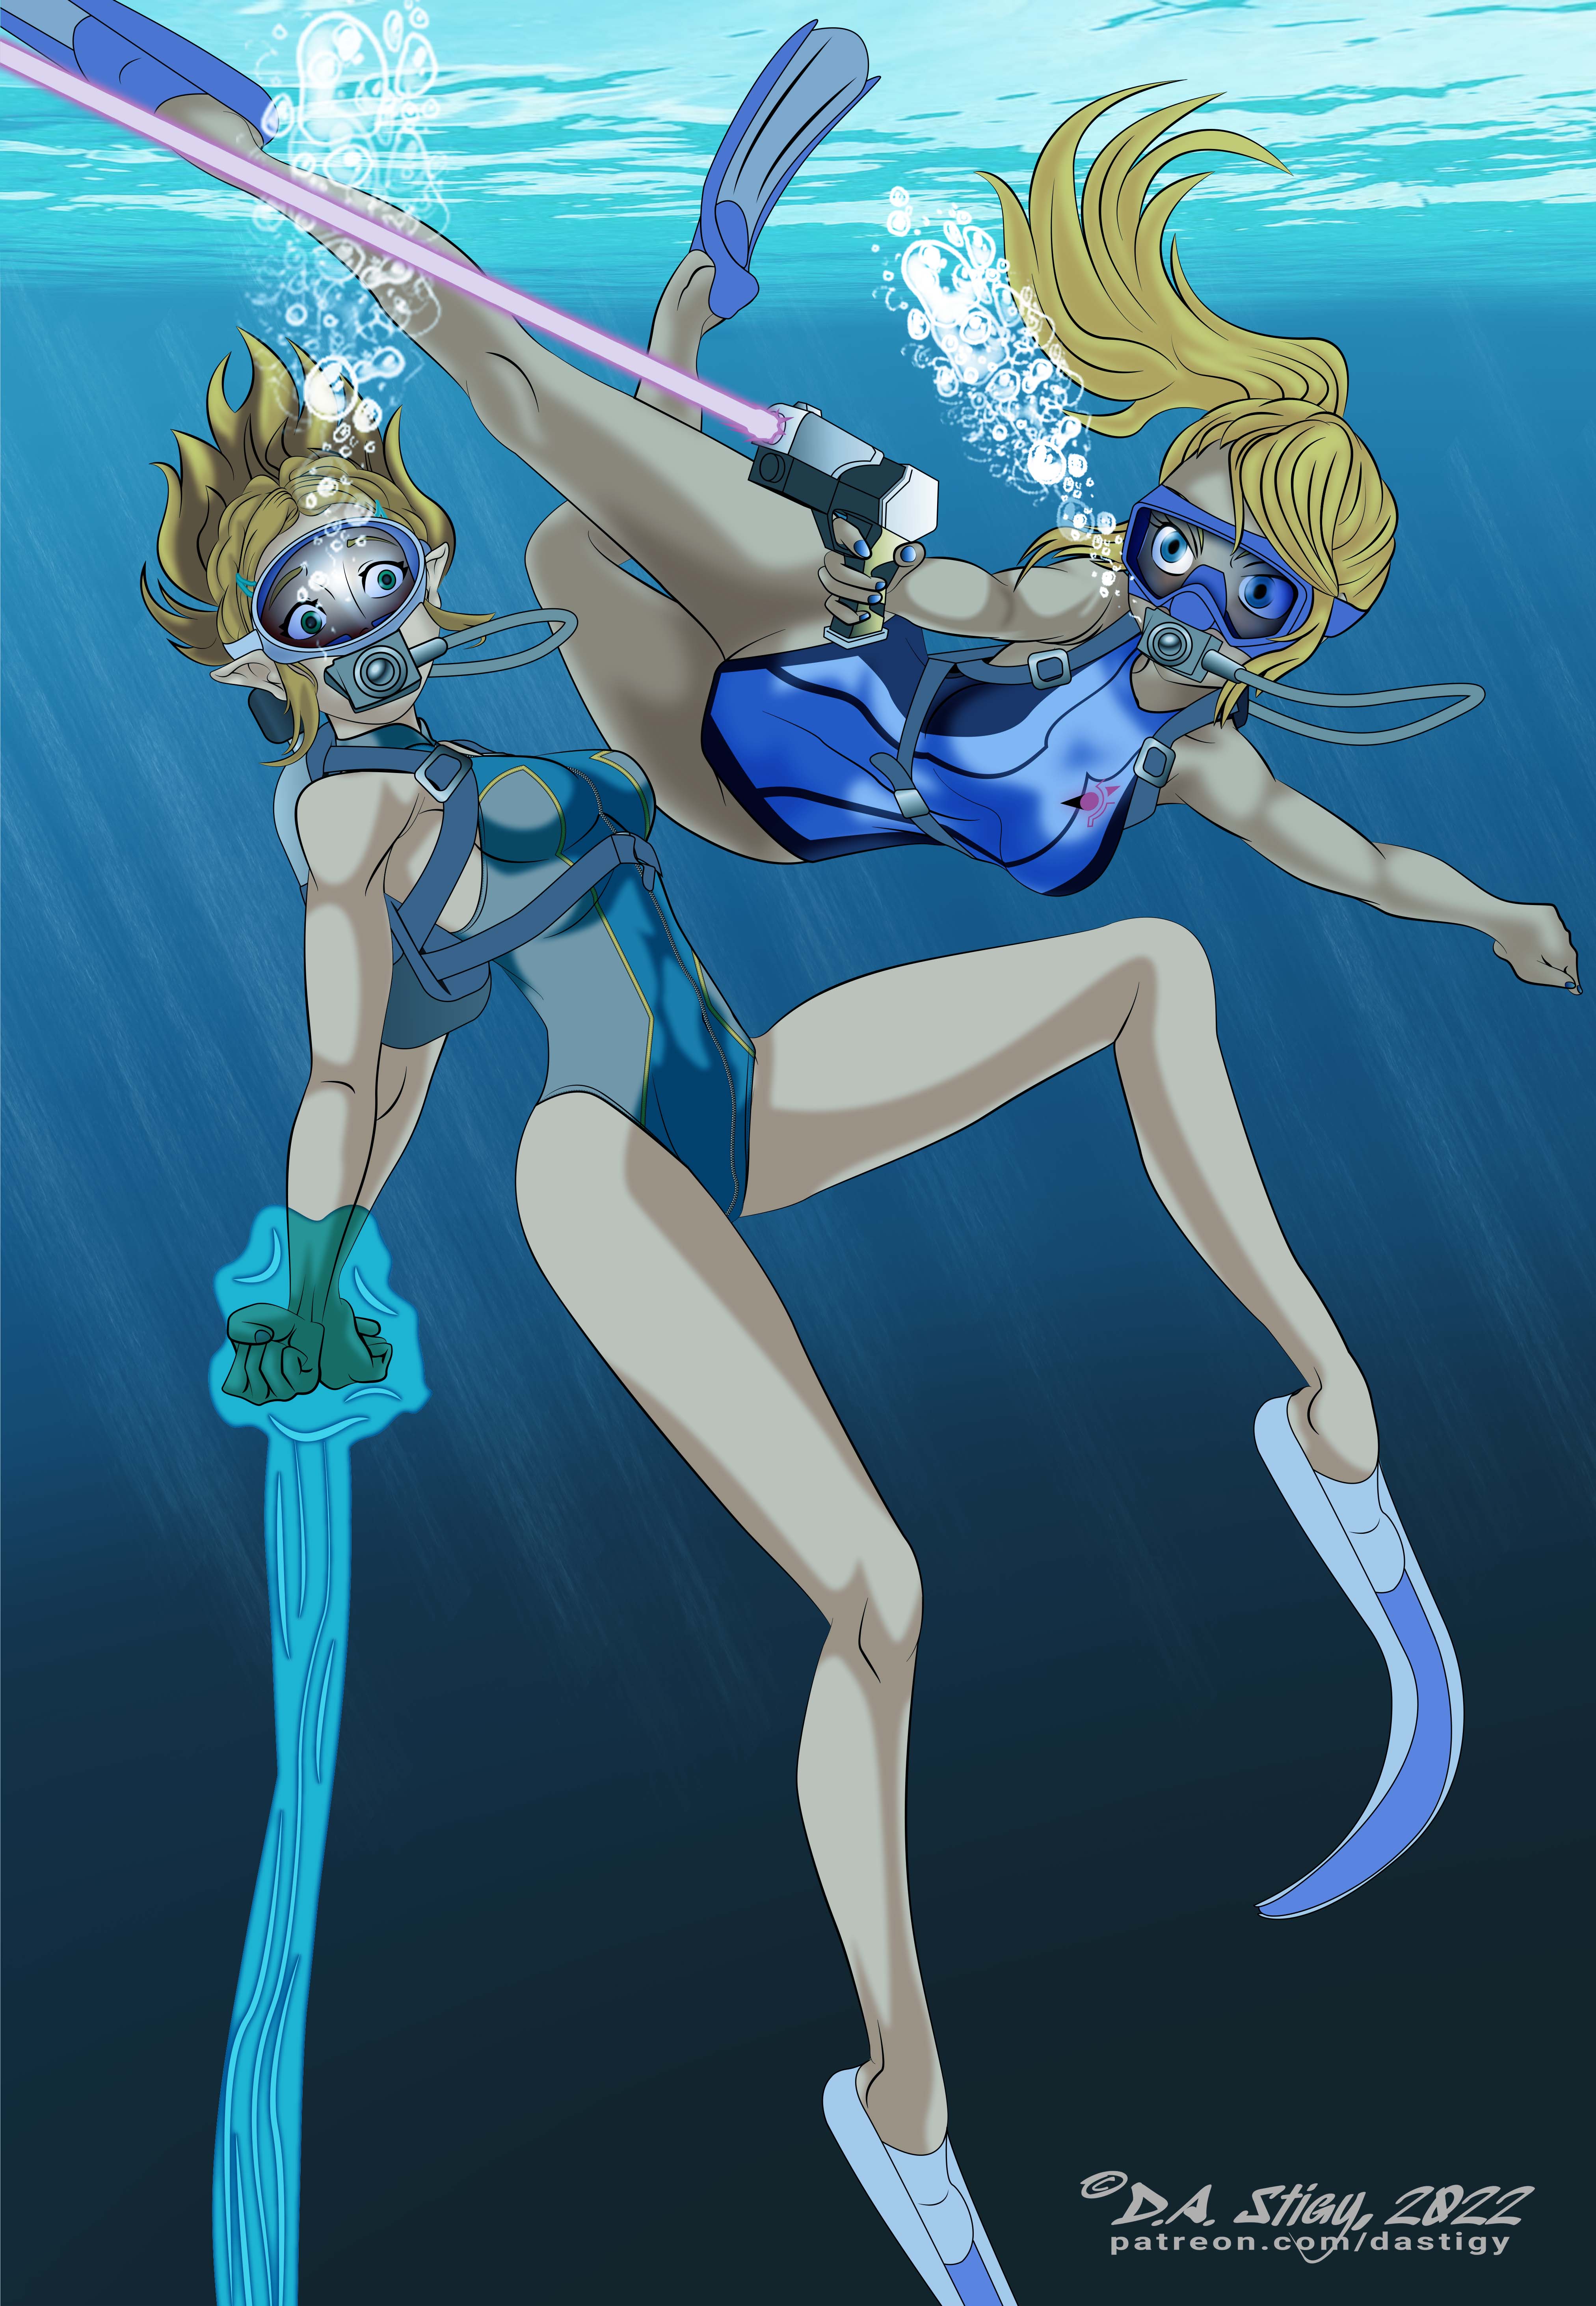 Zelda and Samus attacked while scuba diving